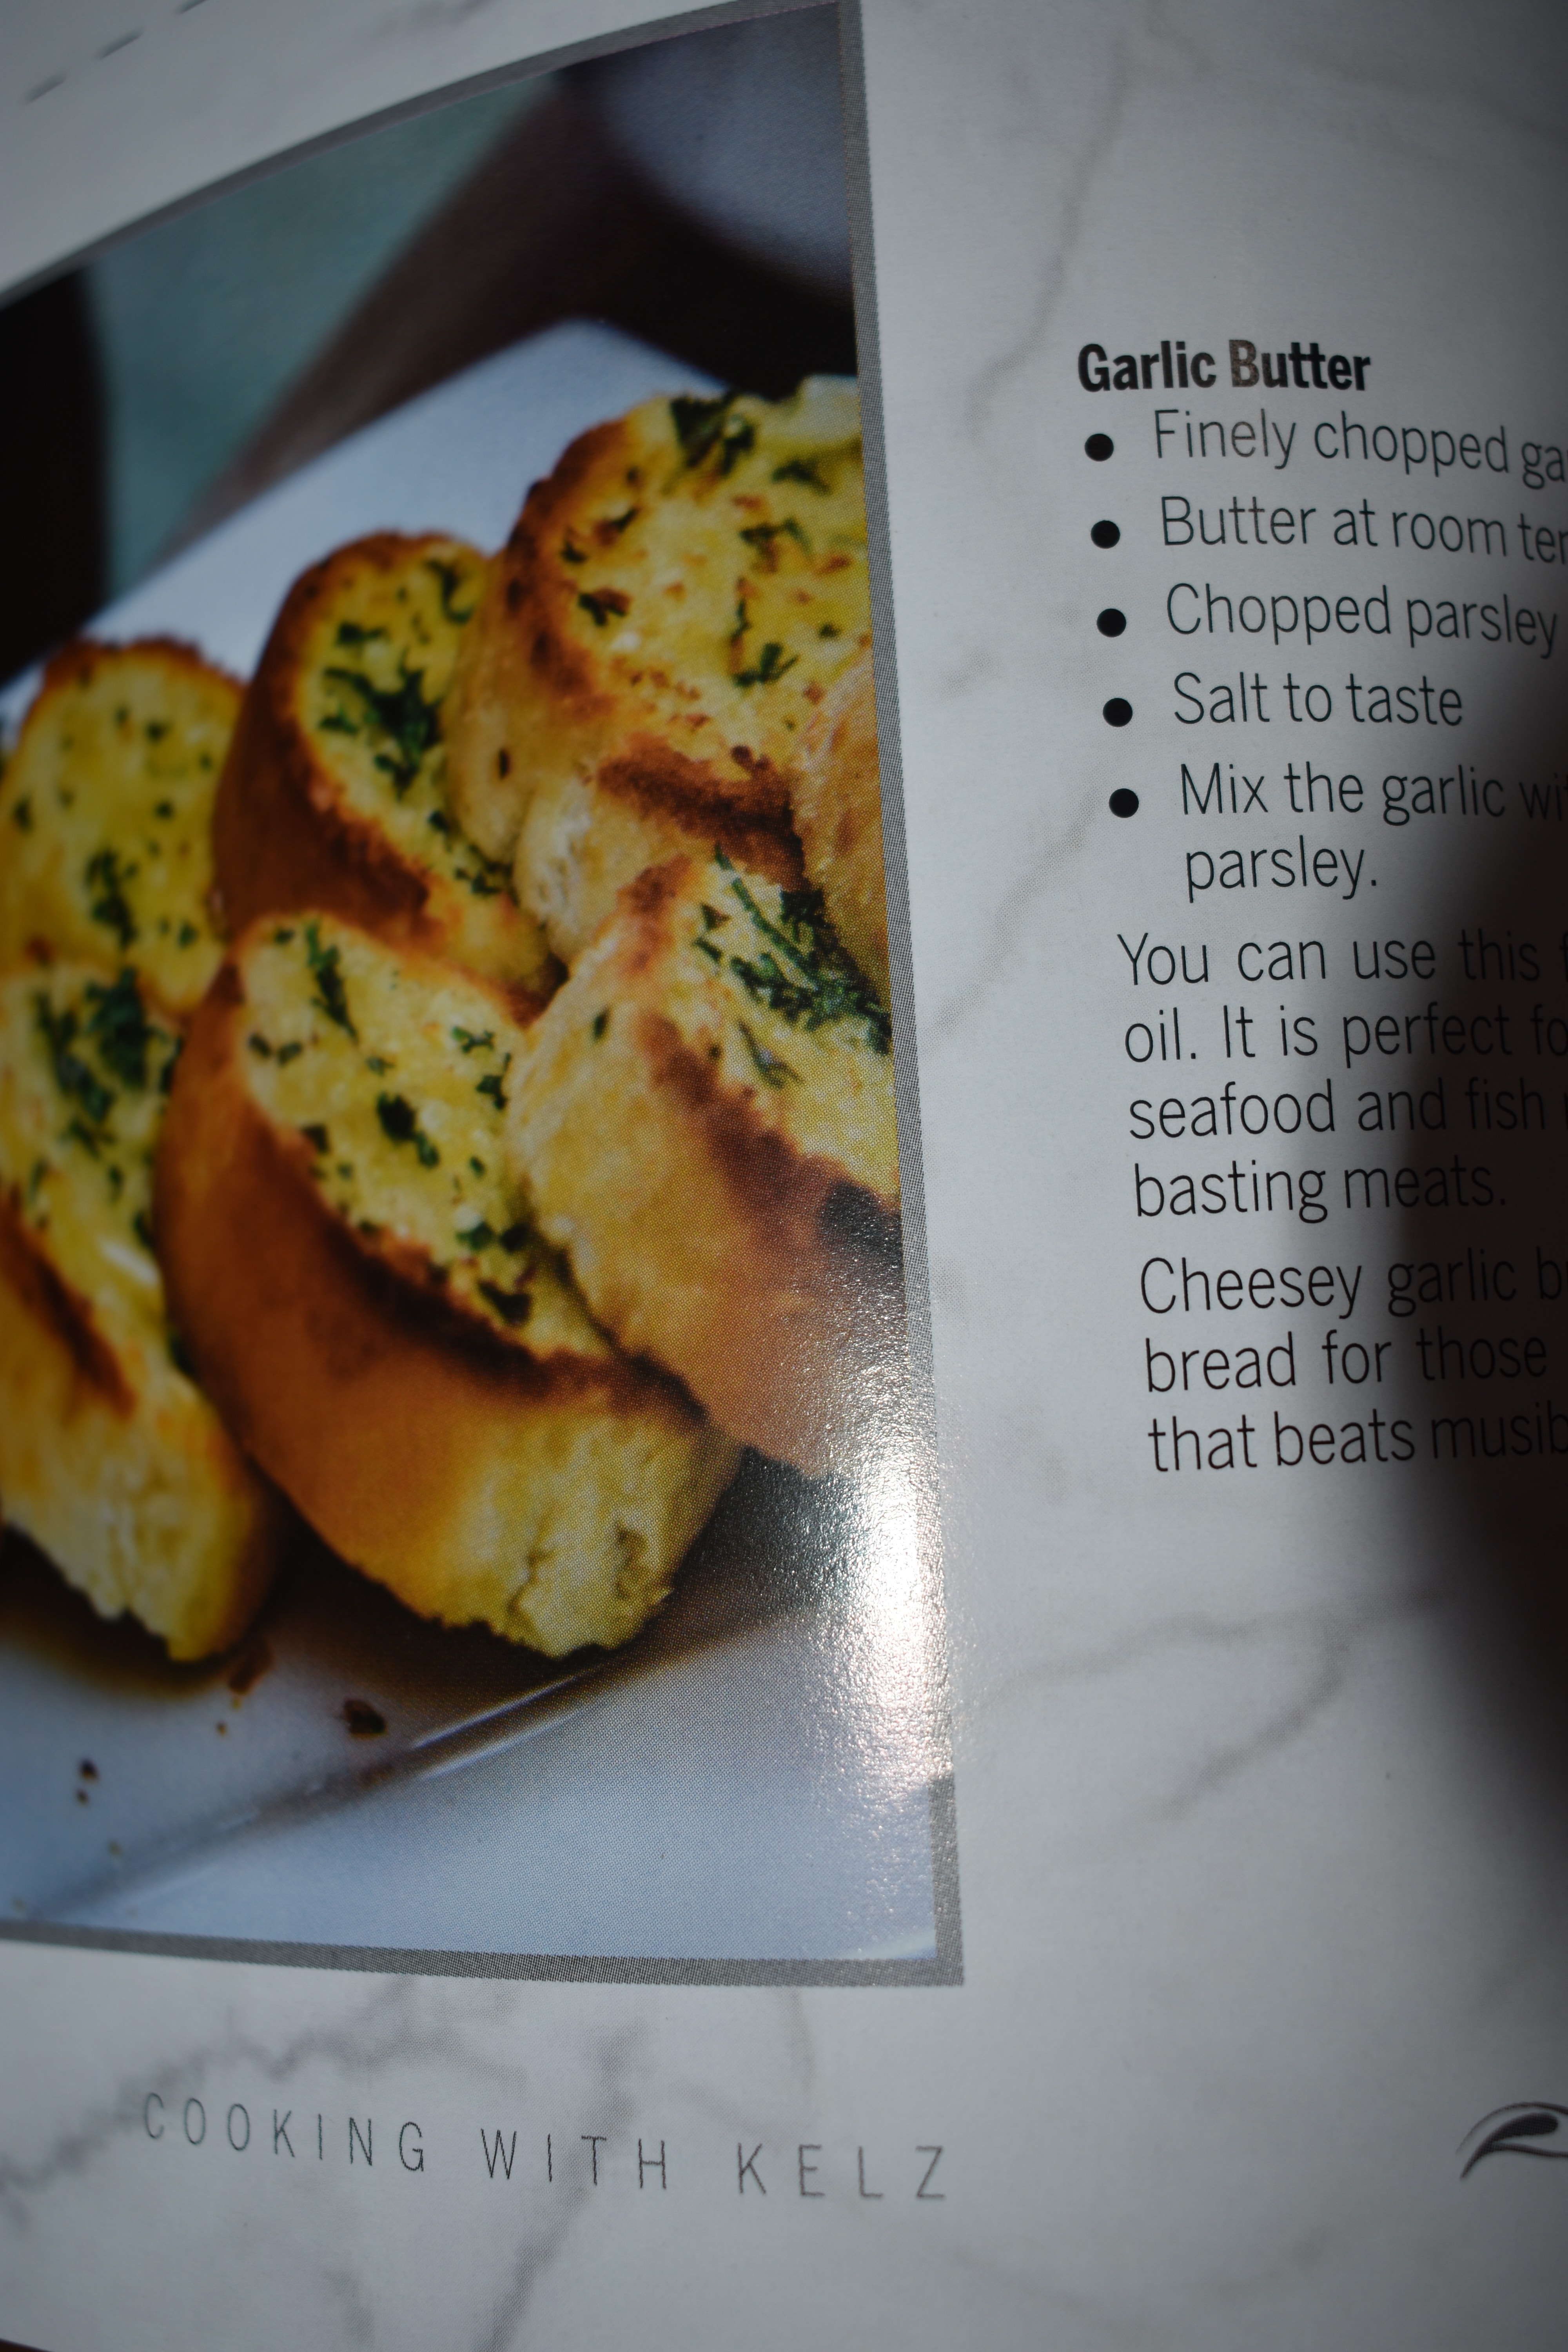 how to make garlic bread, Always extra for love, Cook book, Sarah Akelly